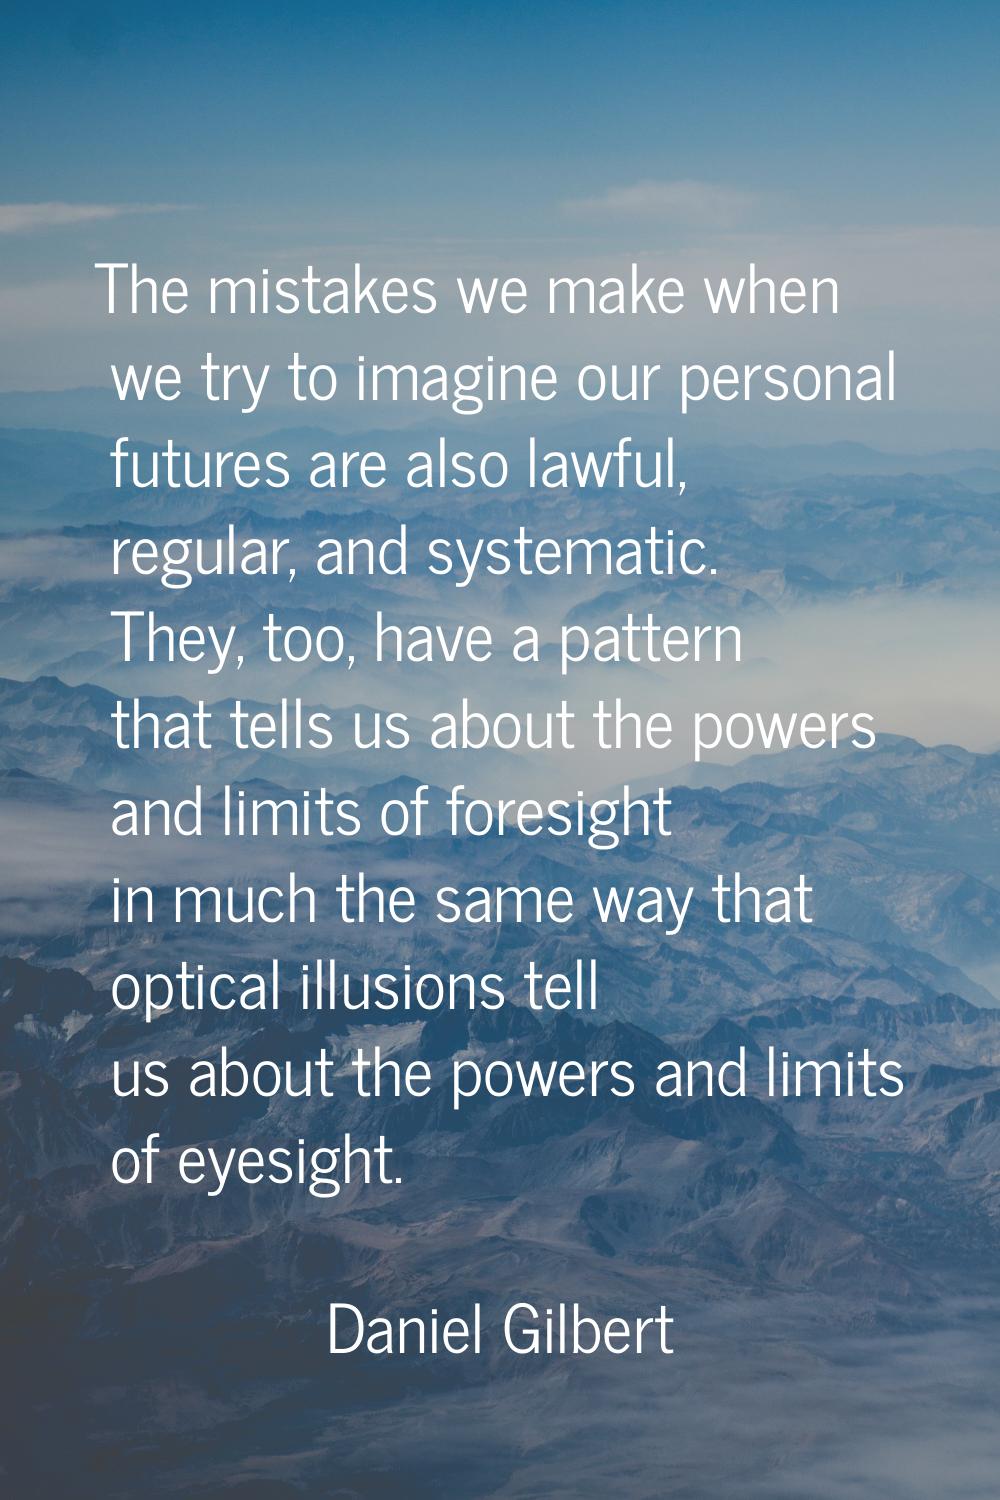 The mistakes we make when we try to imagine our personal futures are also lawful, regular, and syst